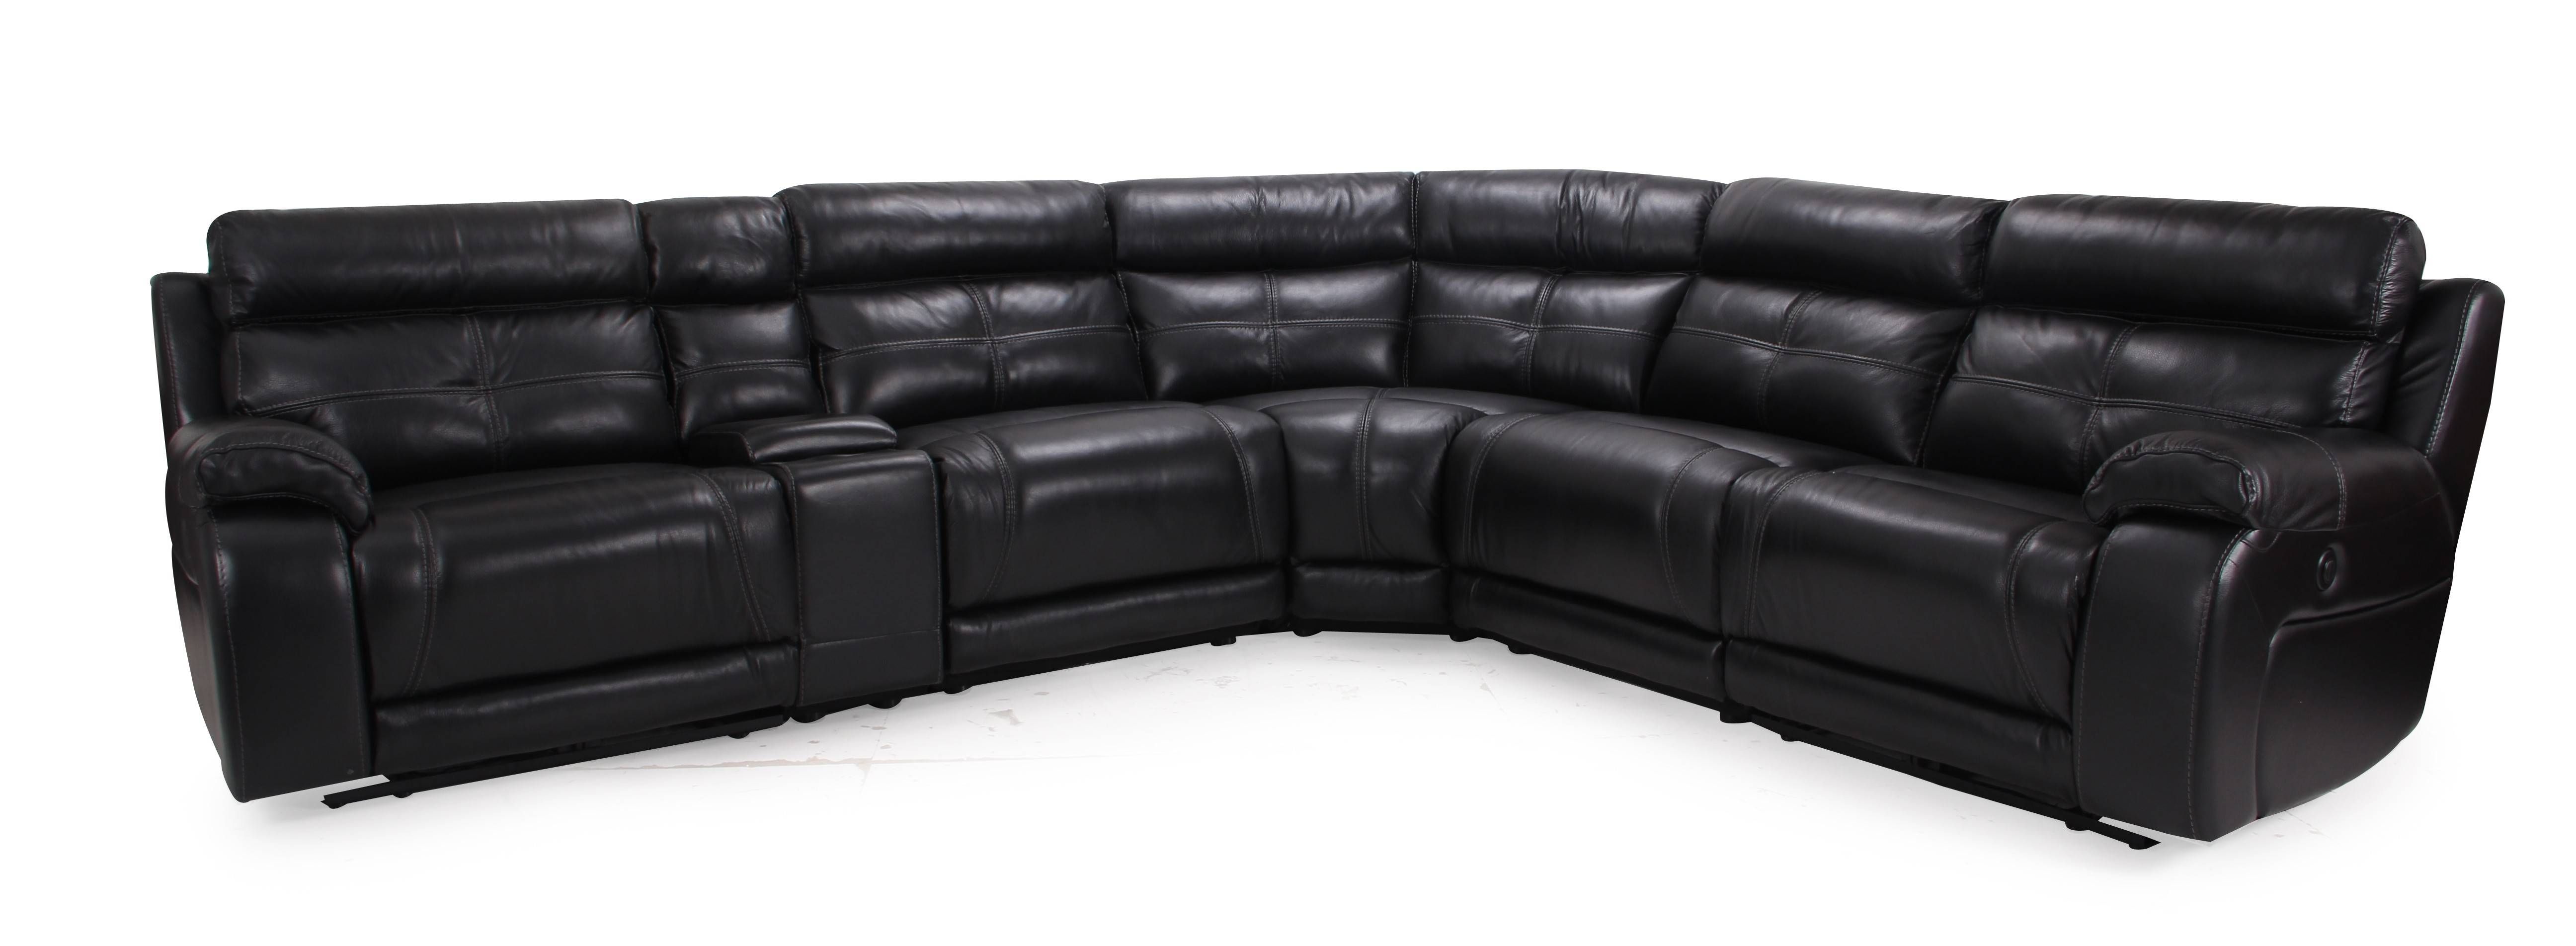 Sofa : Cheers Sofa Recliner Home Style Tips Top With Cheers Sofa With Regard To Cheers Recliner Sofas (View 15 of 15)